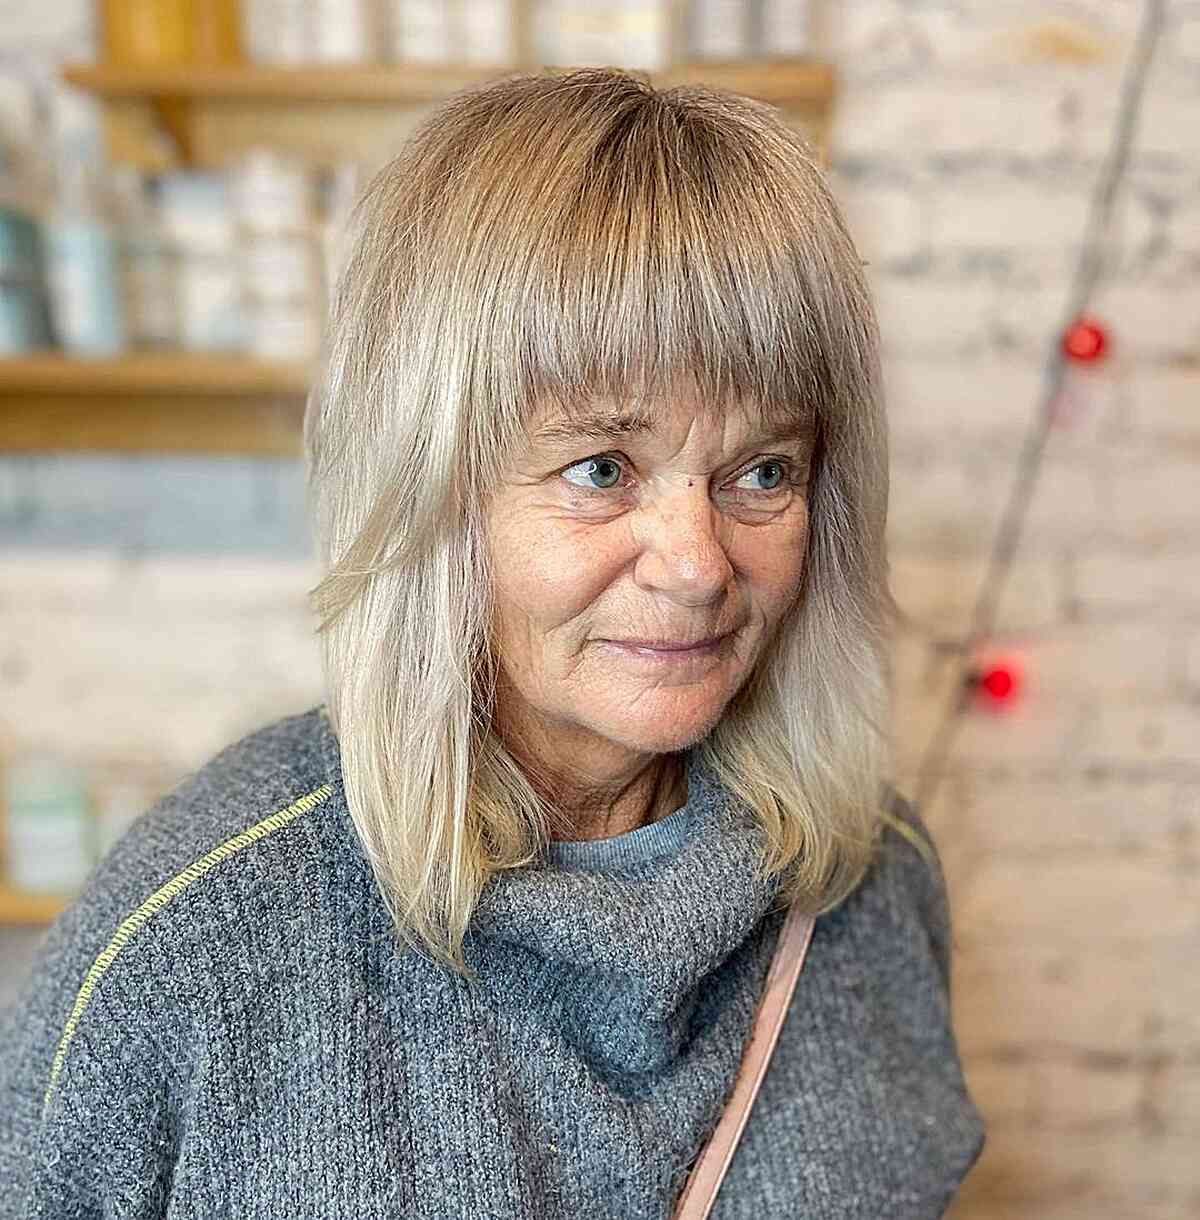 Foil Highlights on Mid-Length Blonde Hair with Bangs for women in their 60s